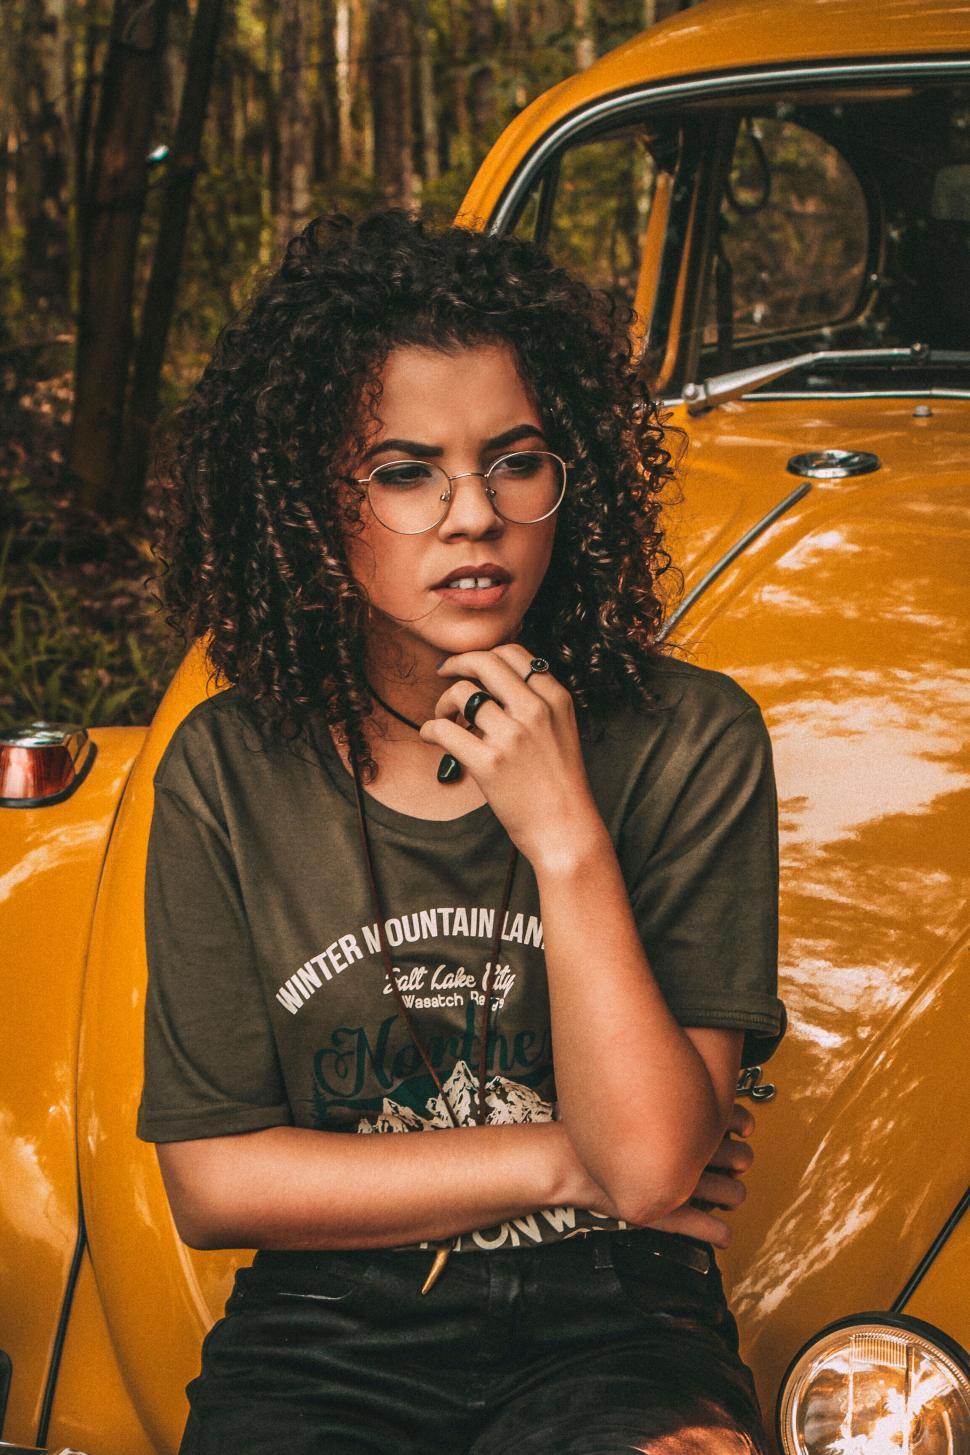 Free Image of Person leaning against yellow vintage car in forest 